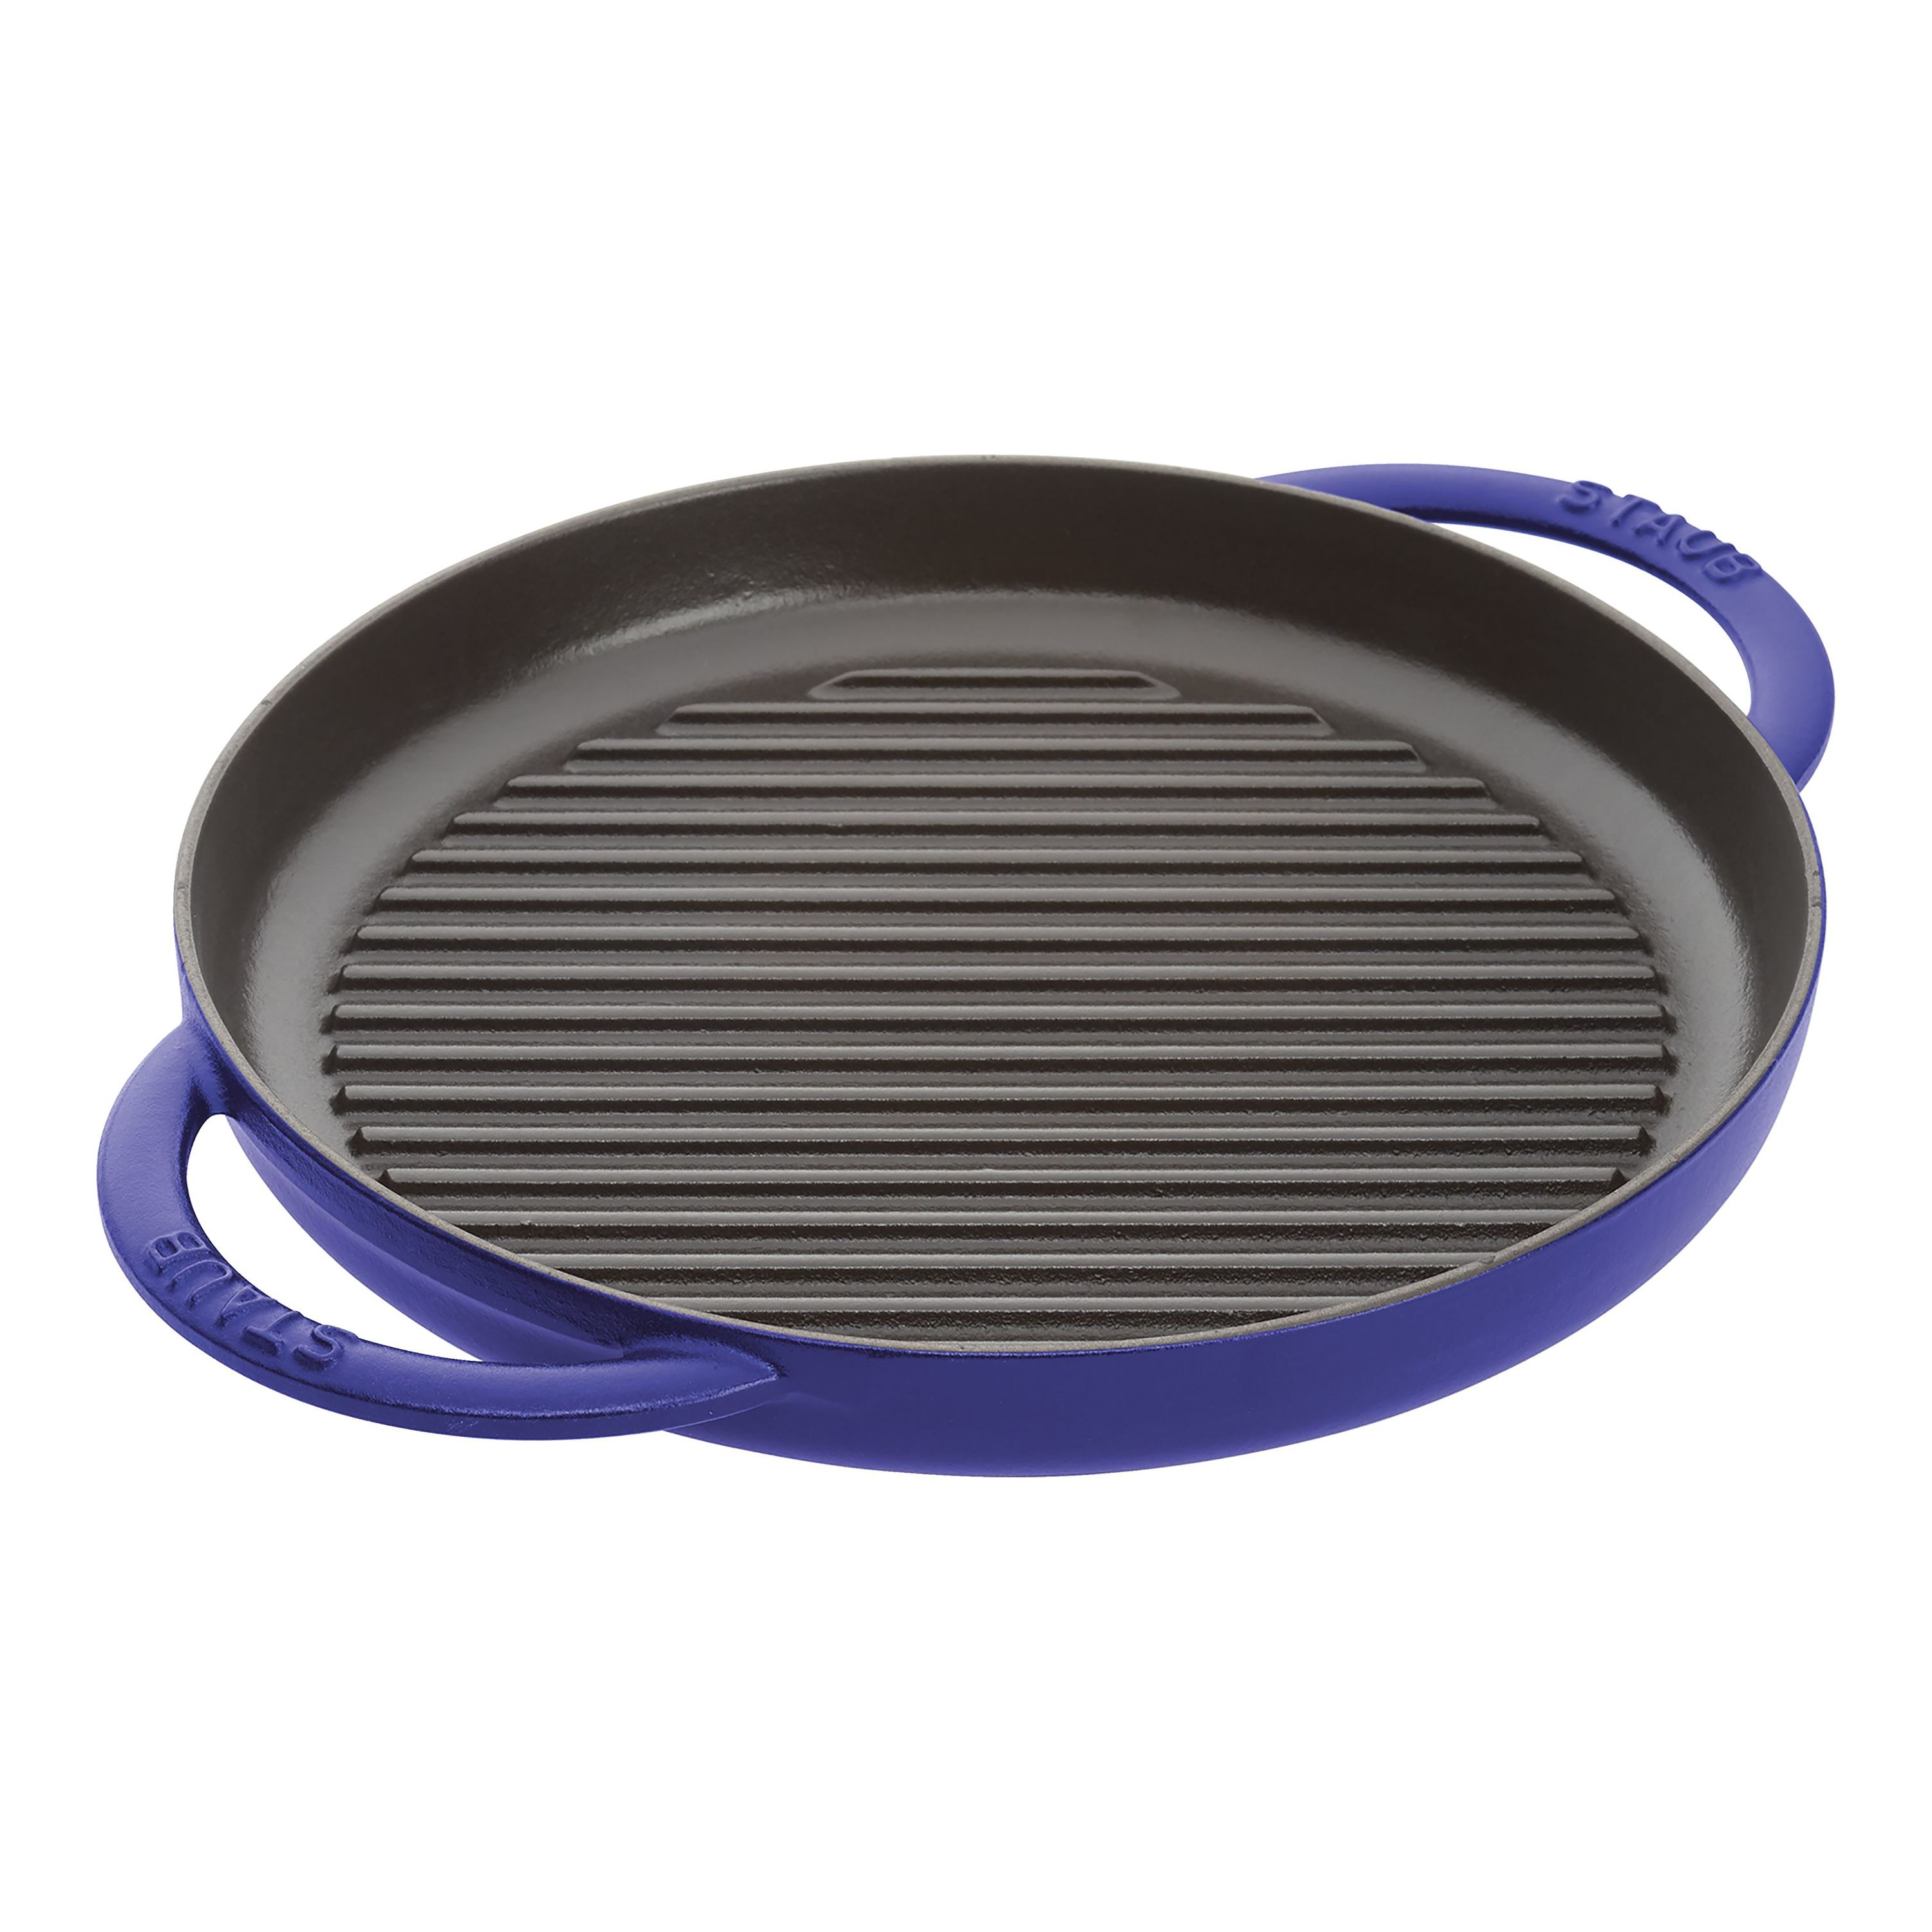 Buy Staub Cast Iron - Grill Pans Pure grill